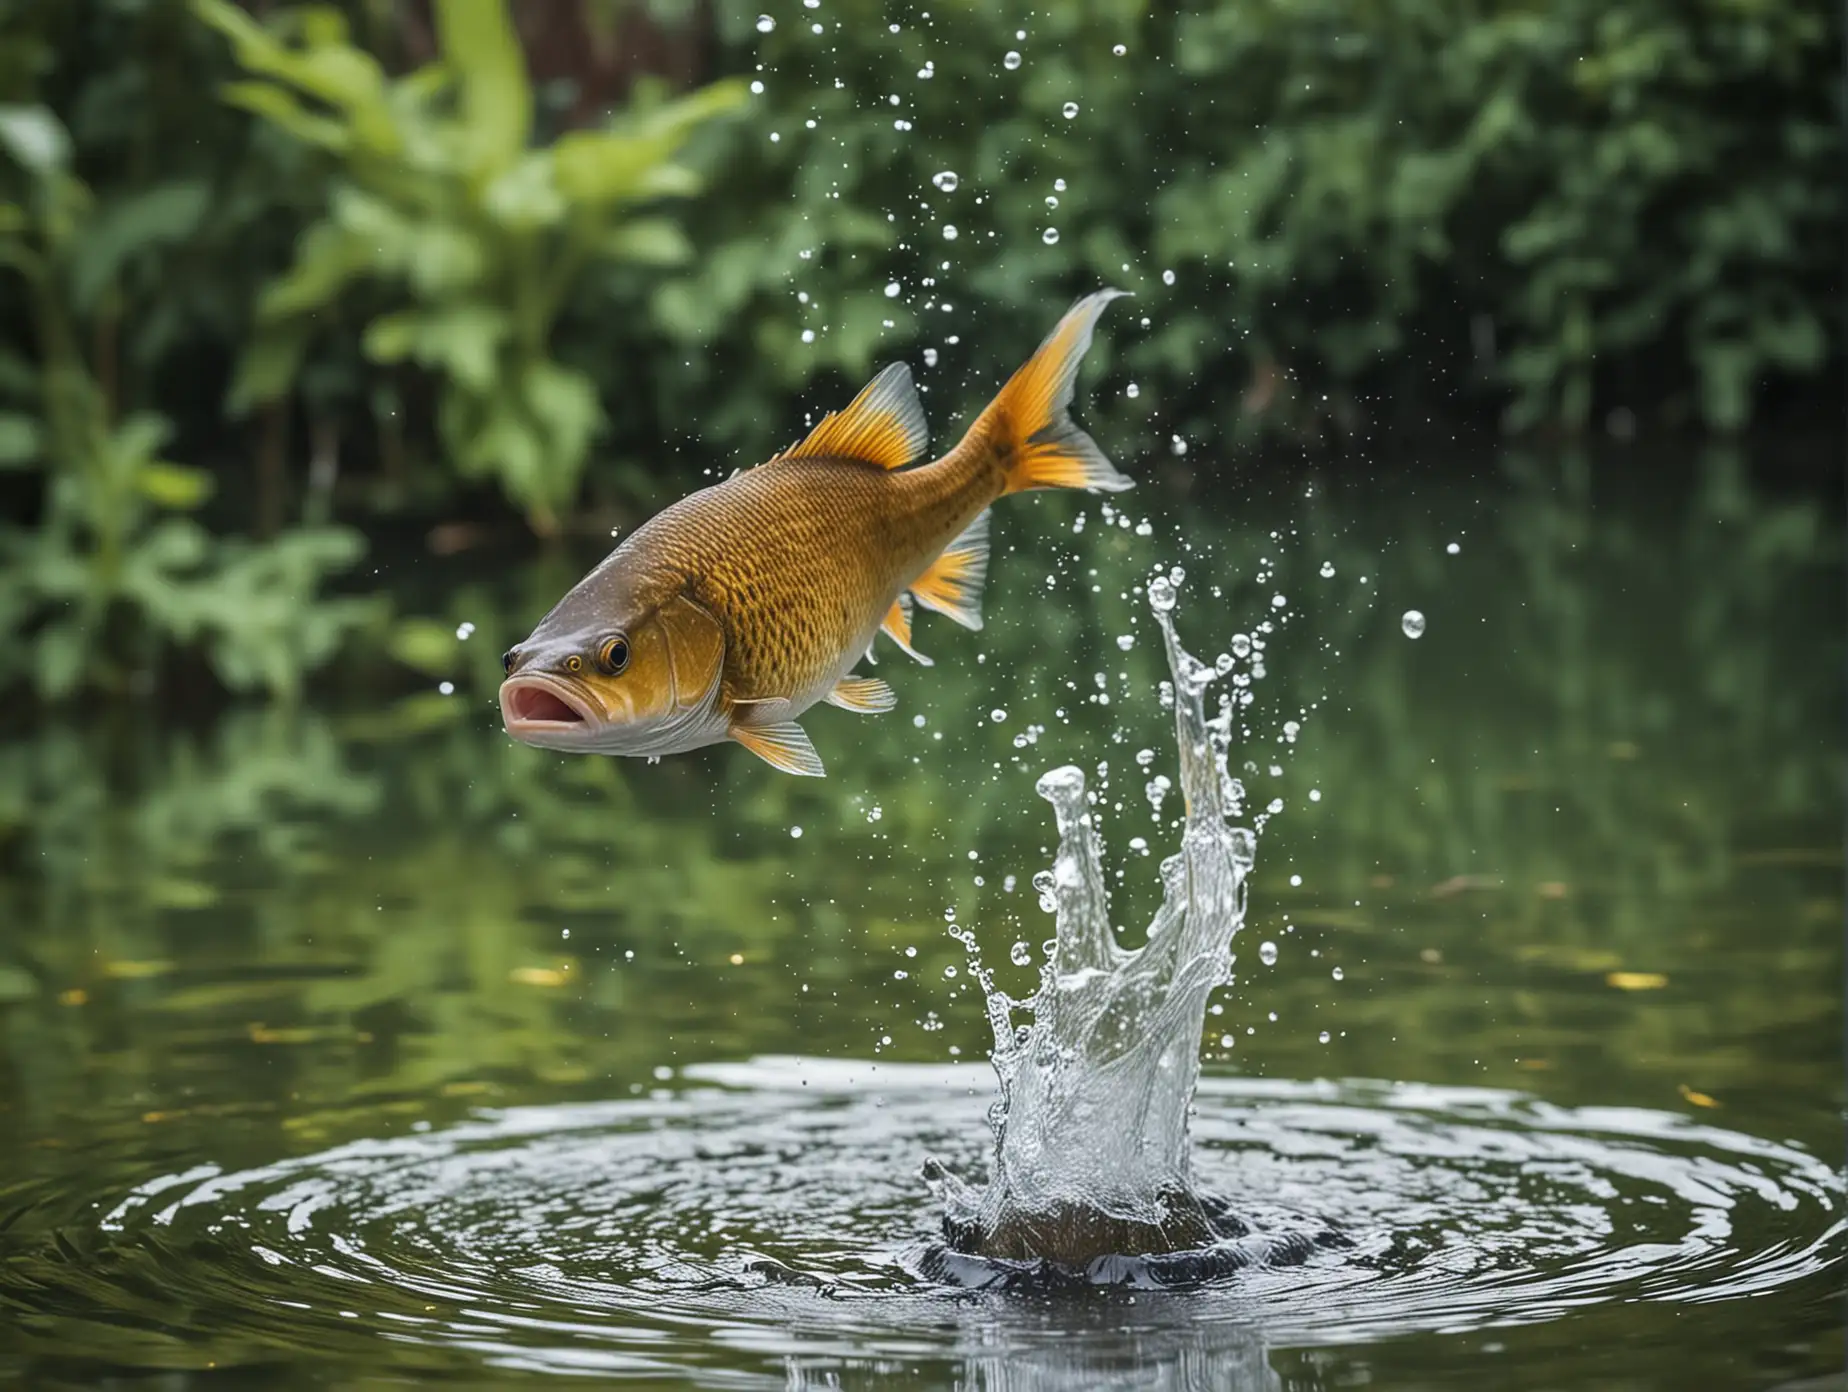 Fish in a pond jumping out of the water background 